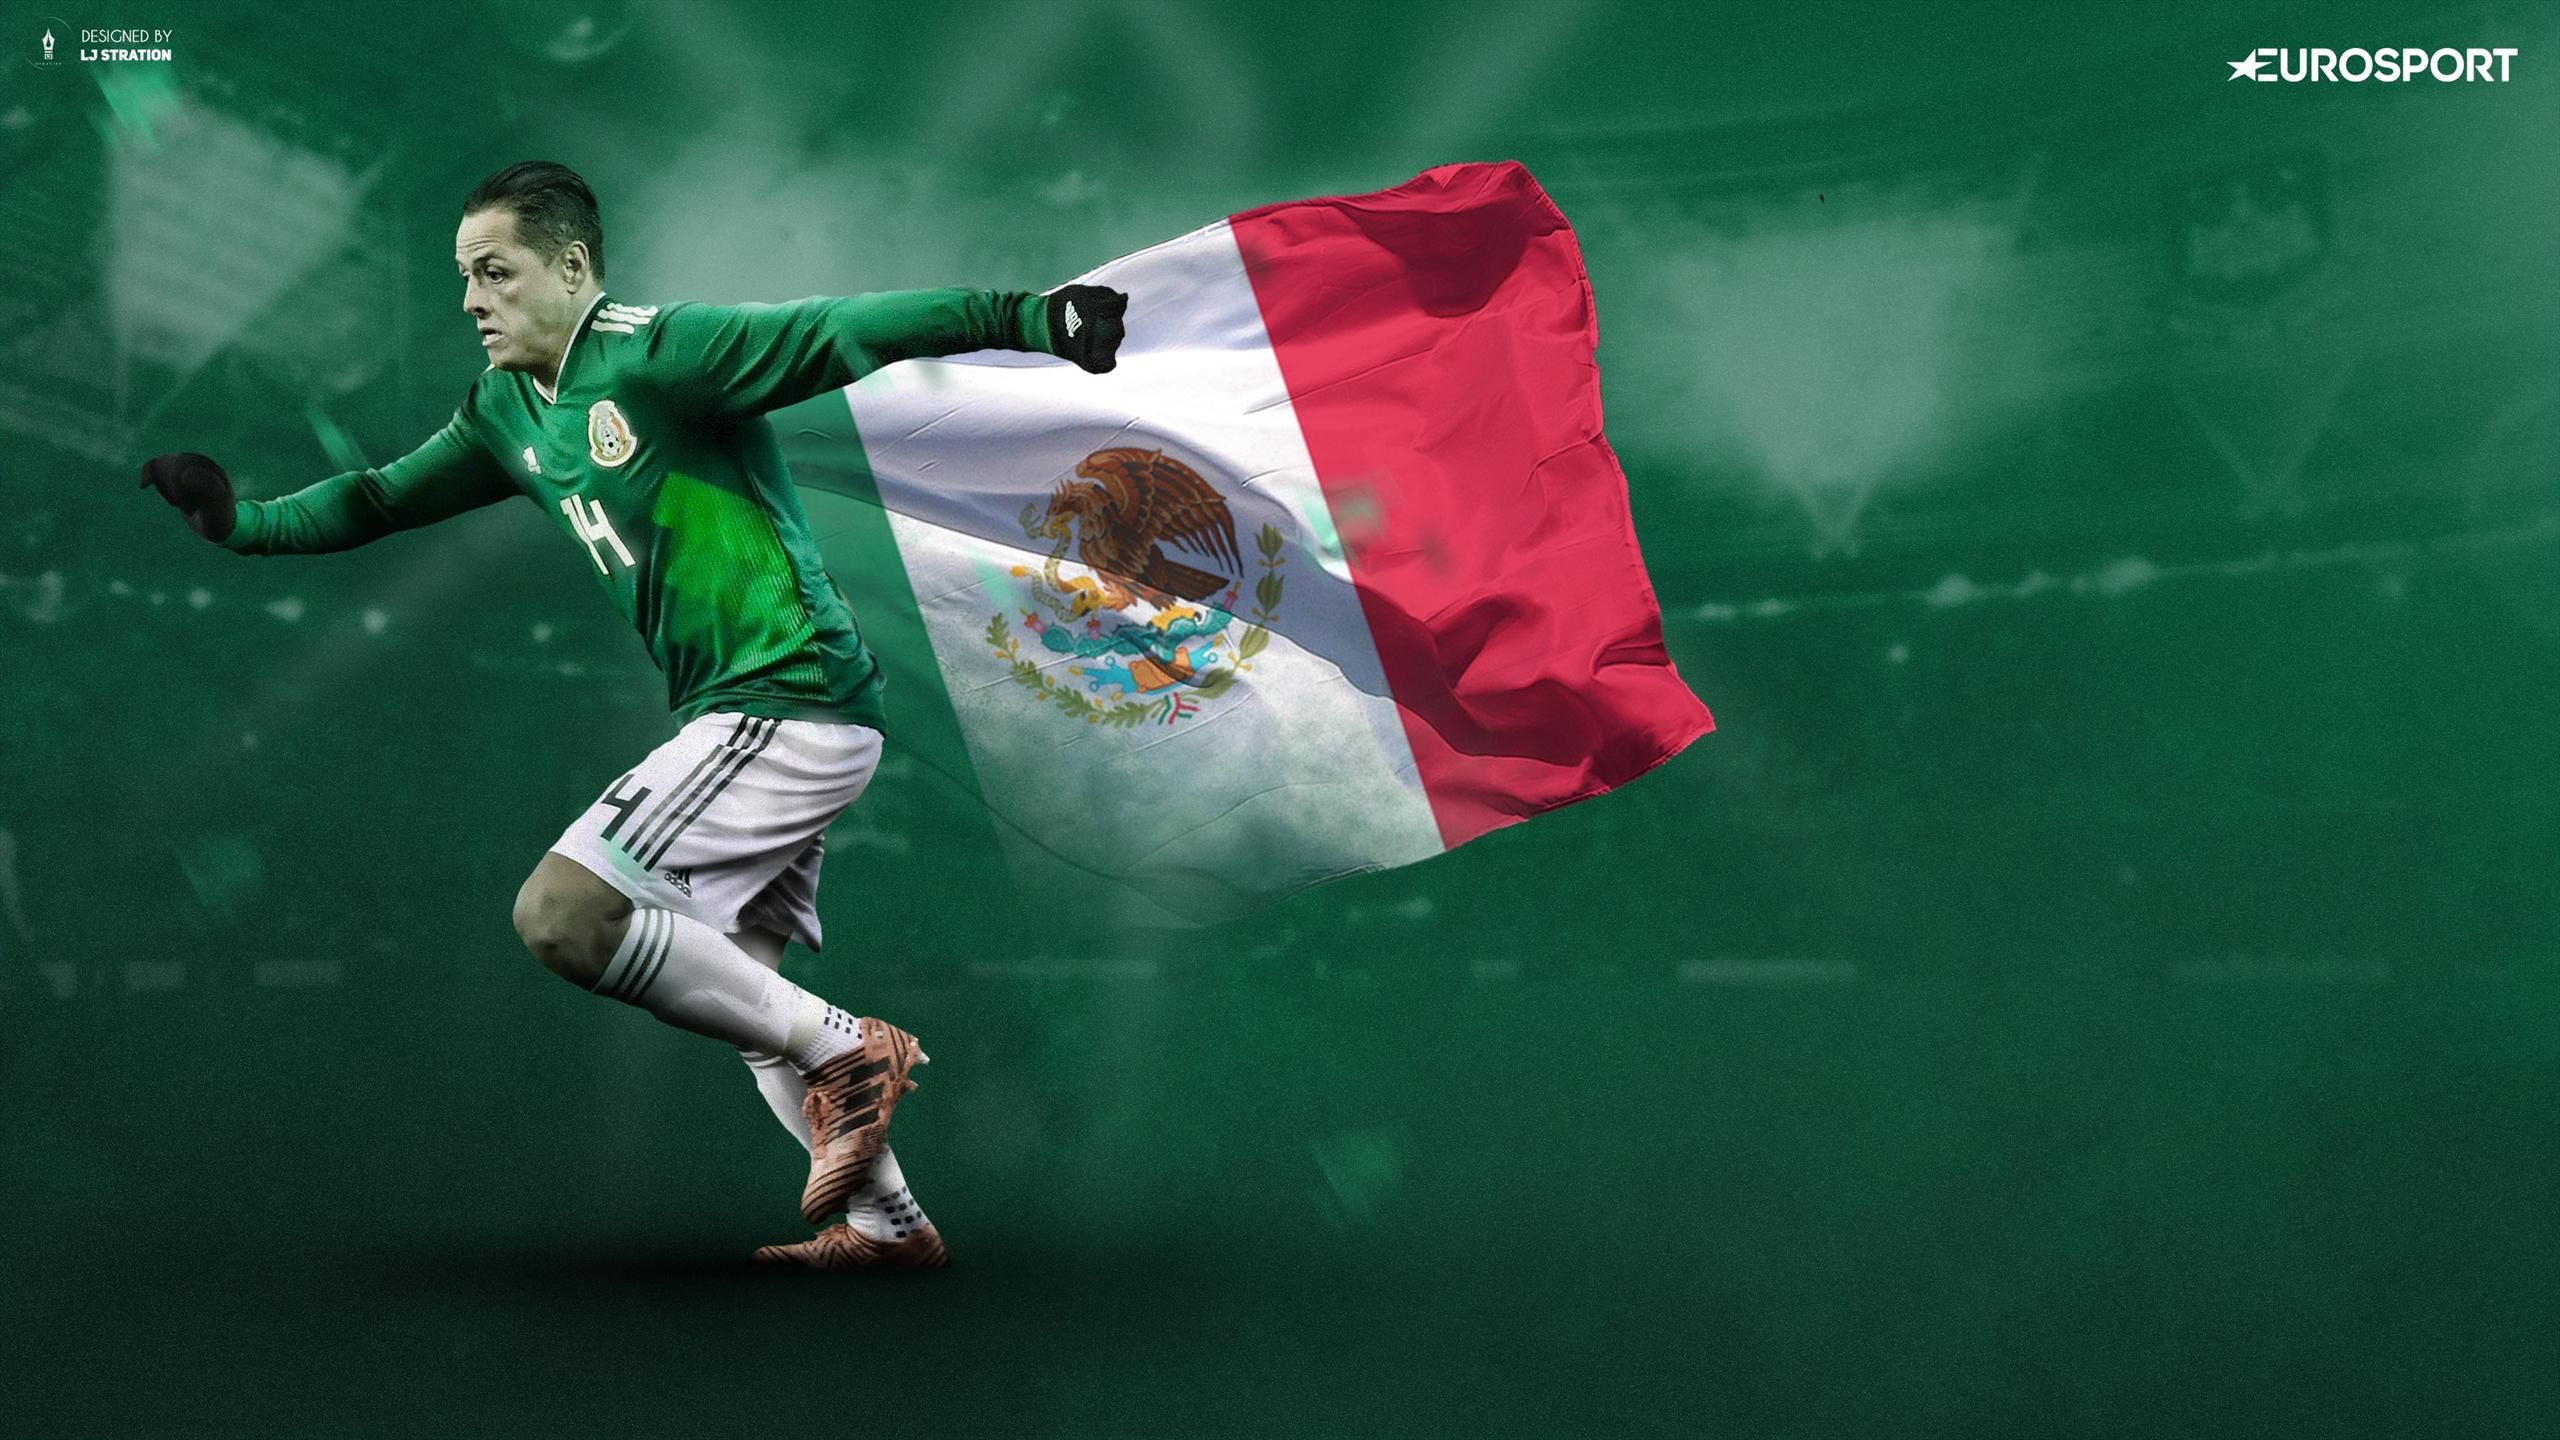 Mexico Soccer Team Wallpapers